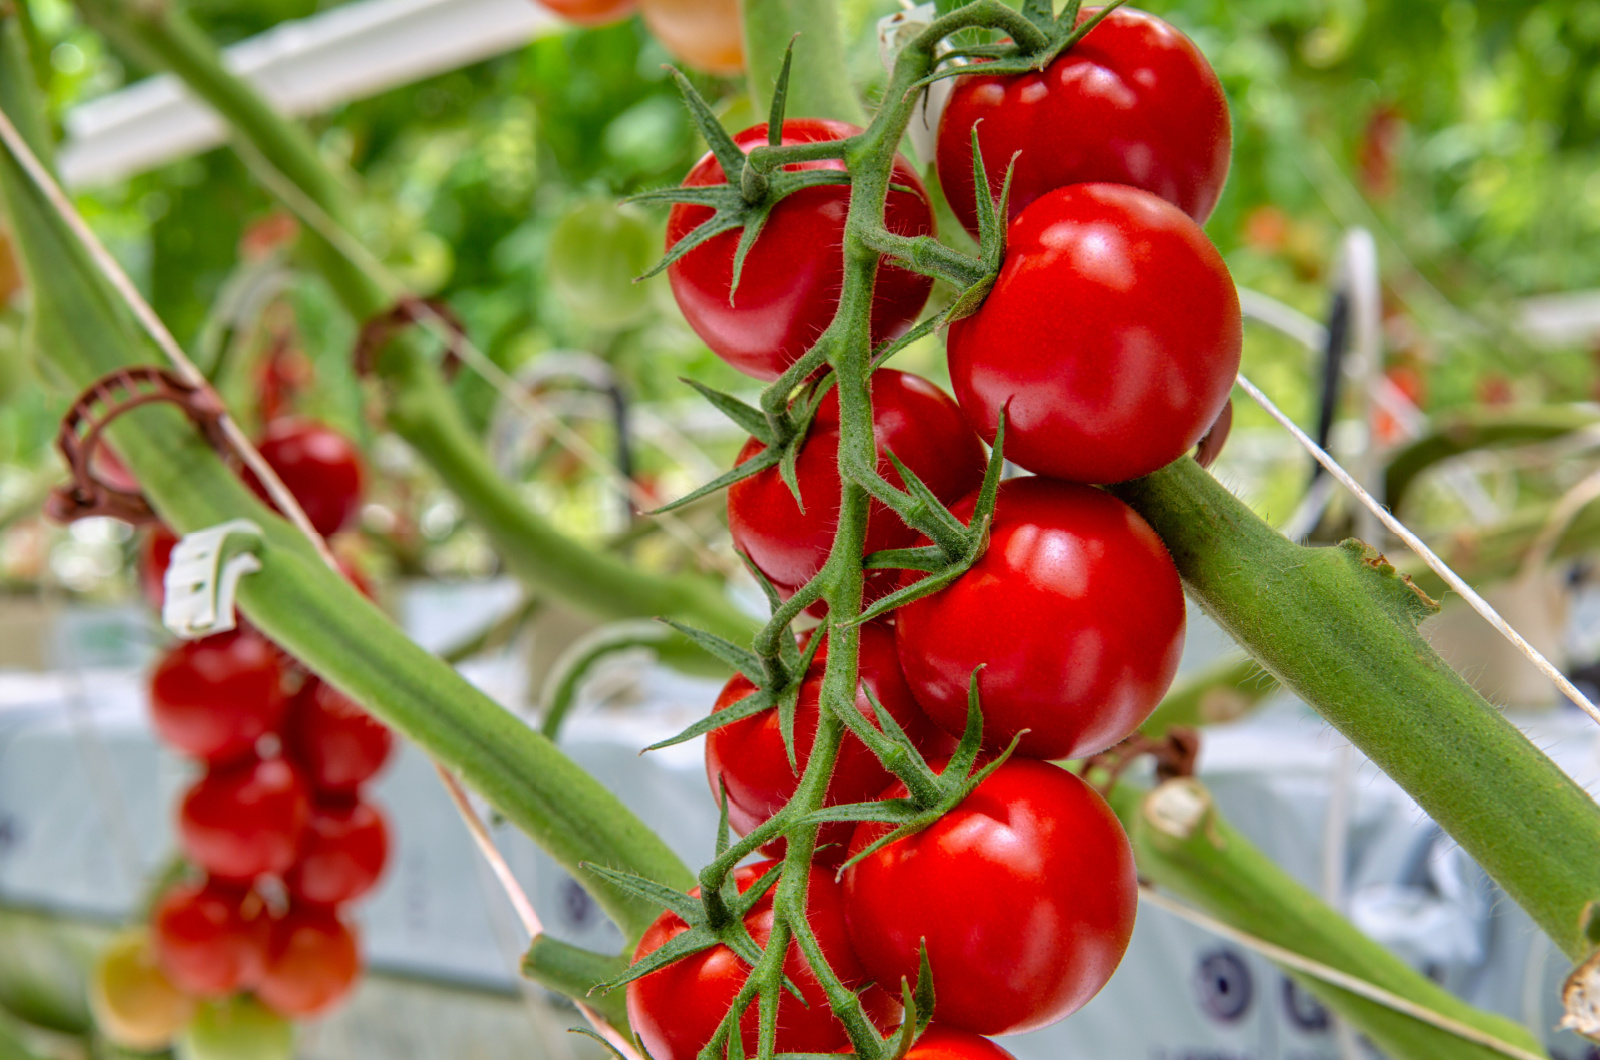 A bunch of red tomato in a greenhouse